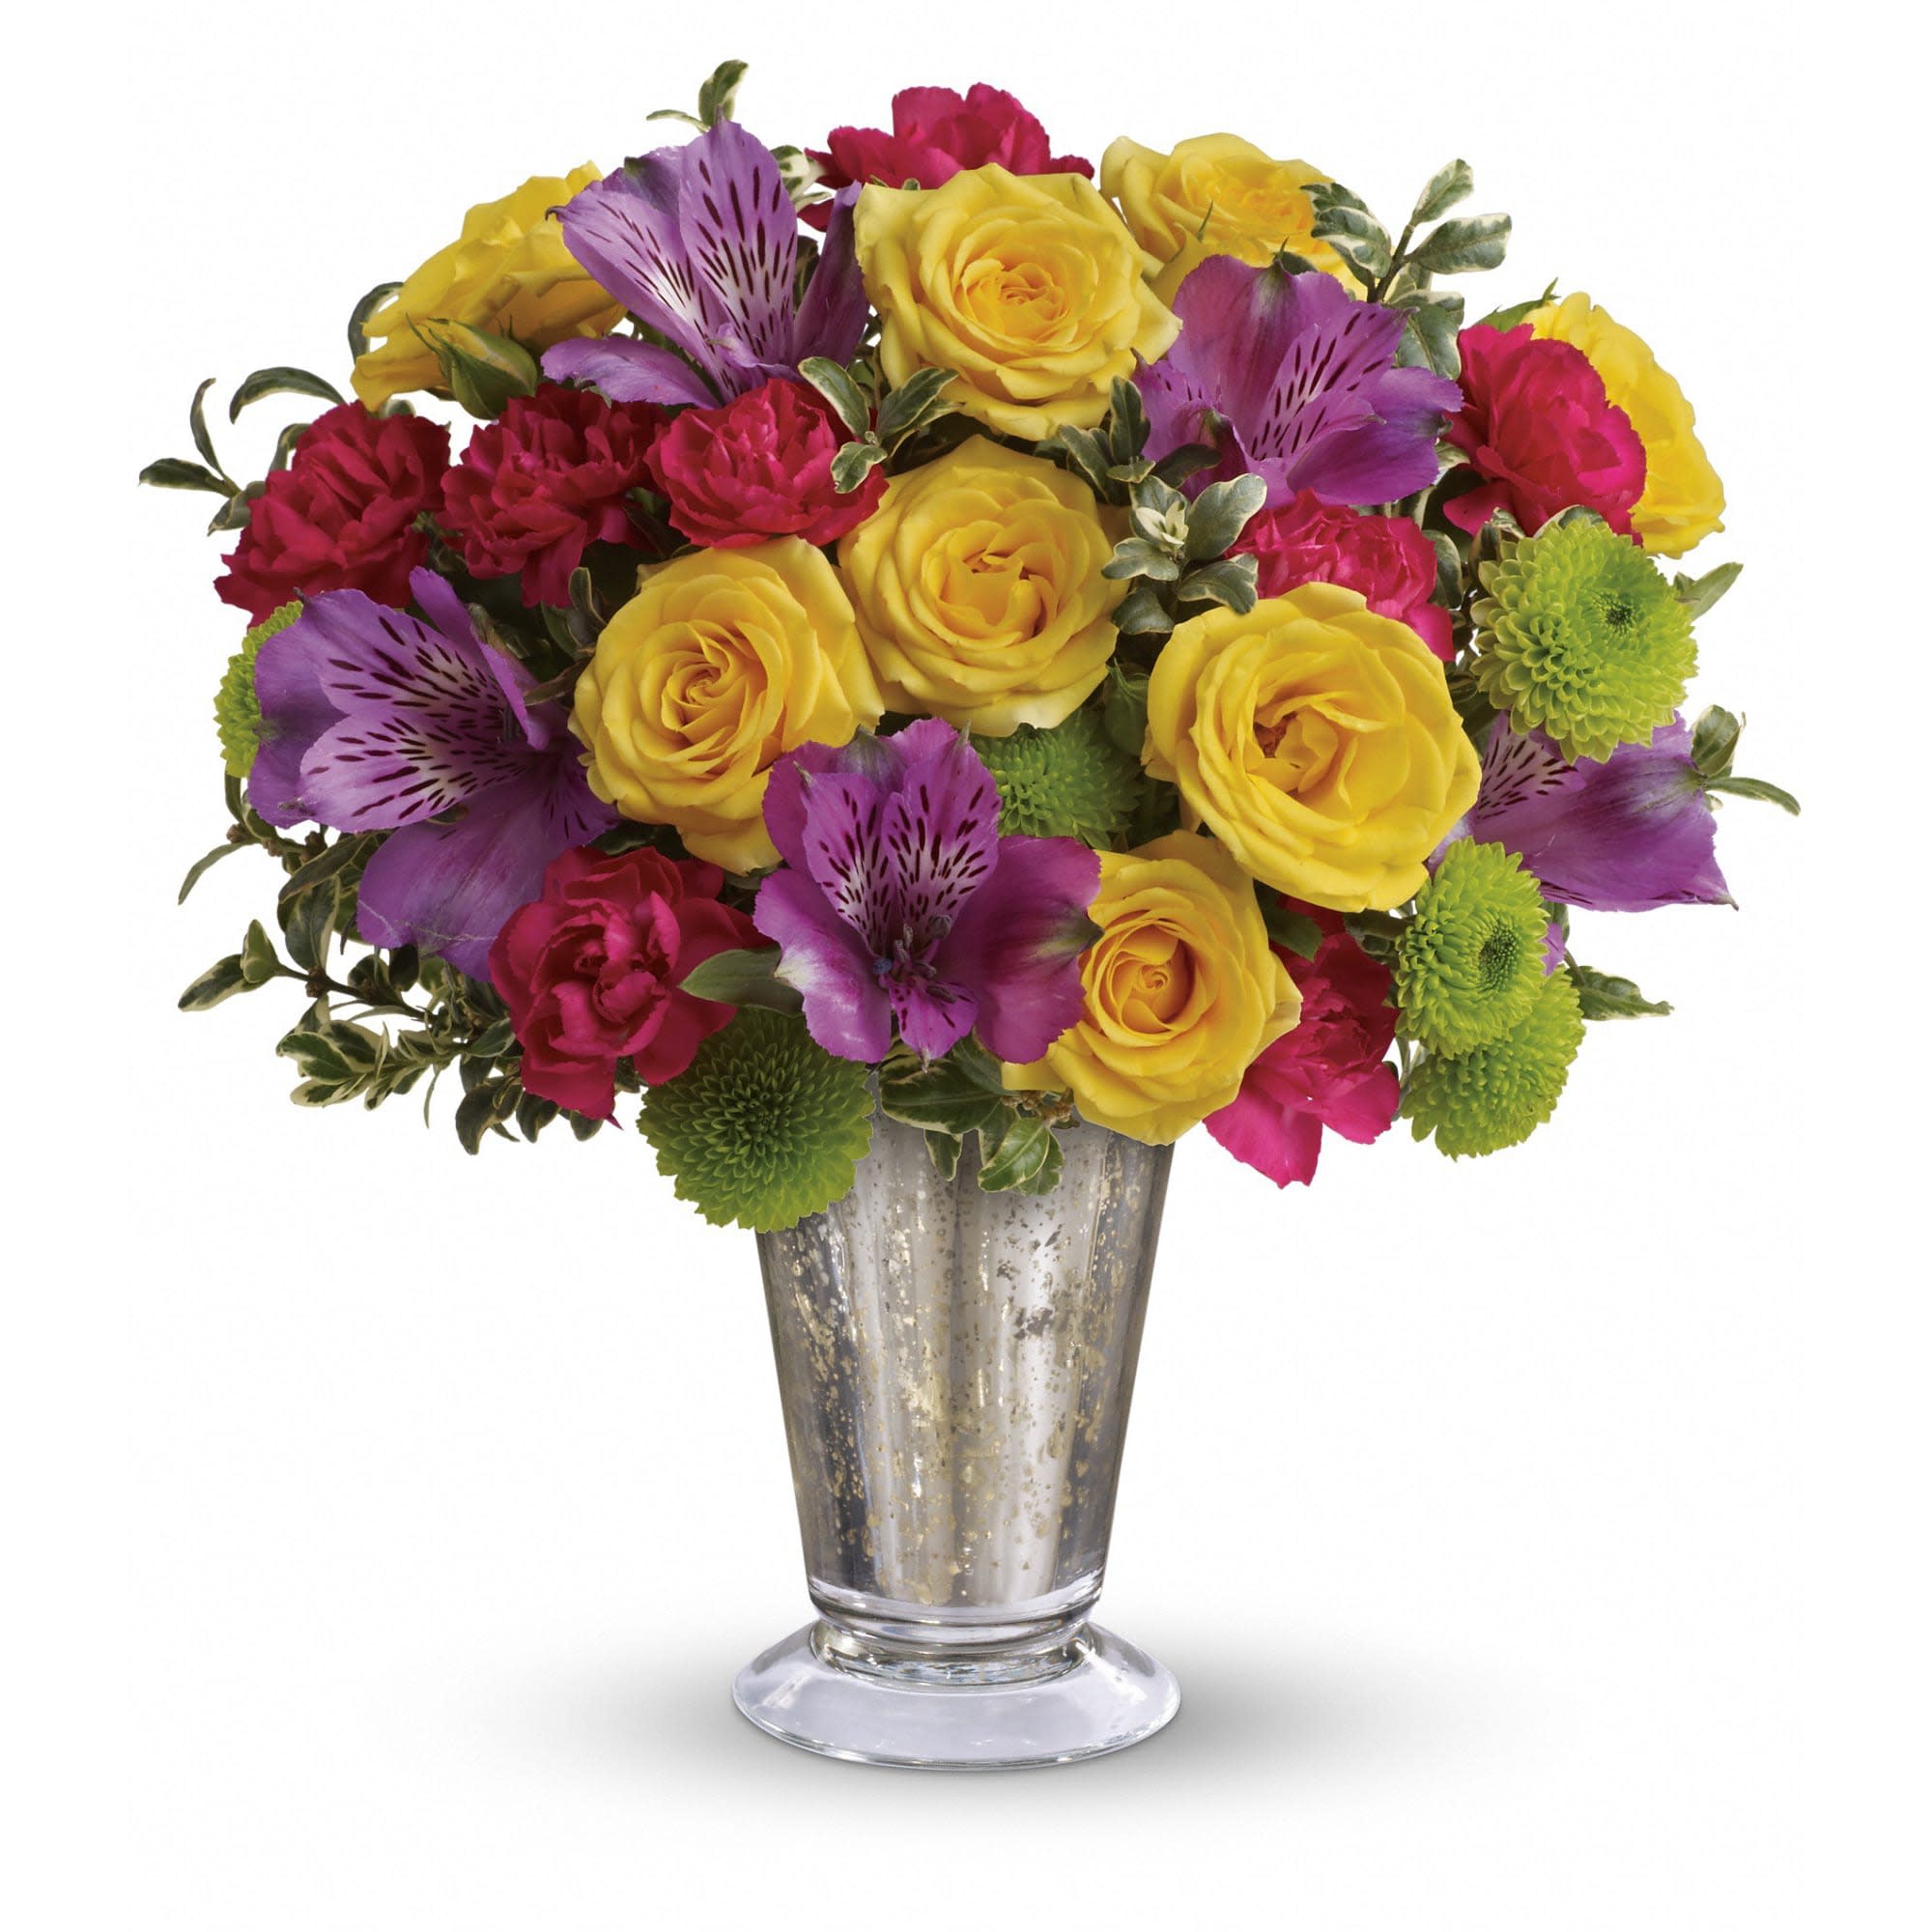 Teleflora's Fancy That Bouquet - A timeless Mercury Glass vase lends a fancy flourish to this uplifting bouquet. Yellow roses and miniature hot pink carnations are just the way to pop up her day! 